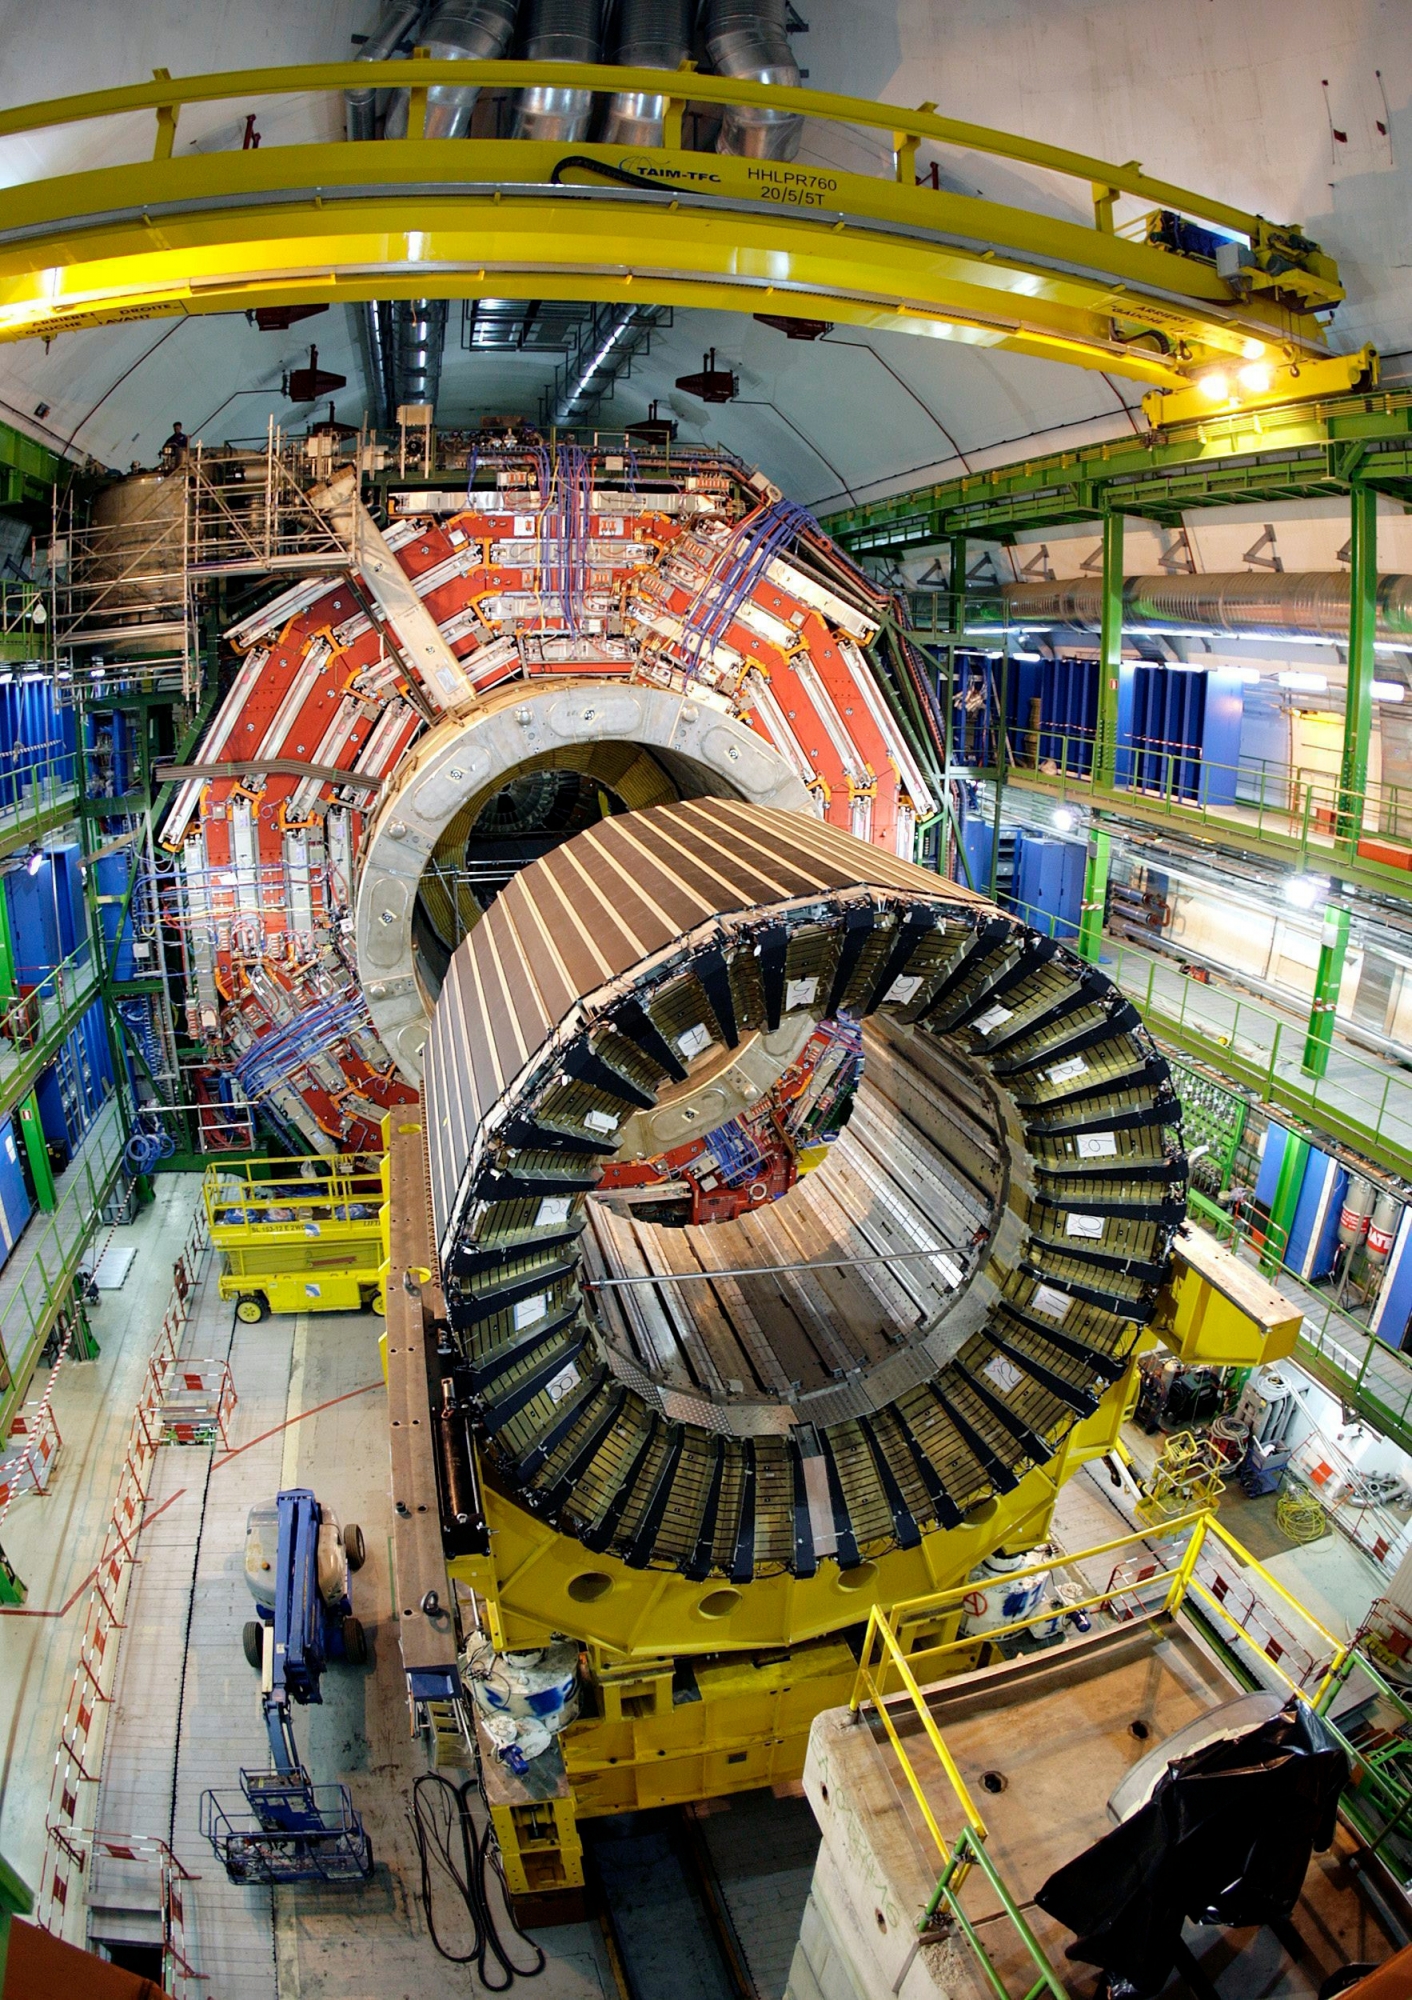 FILE - Picture taken shows the magnet core of the world's largest superconducting solenoid magnet (CMS, Compact Muon Solenoid), one of the experiments preparing to take data at European Organization for Nuclear Research (CERN)'s Large Hadron Collider (LHC) particule accelerator, in Geneva, Switzerland, Thursday, March 22, 2007. - Scientists of the CERN started the Large Hadron Collider LHC on Wednesday, September 10, 2008 for the first time and successfully sent a beam of particles through the 27 kilometers long ring of the huge LHC. The first beam took 53 minutes to complete the circuit in this first test run.  (KEYSTONE/Martial Trezzini) SWITZERLAND CERN LHC LAUNCH